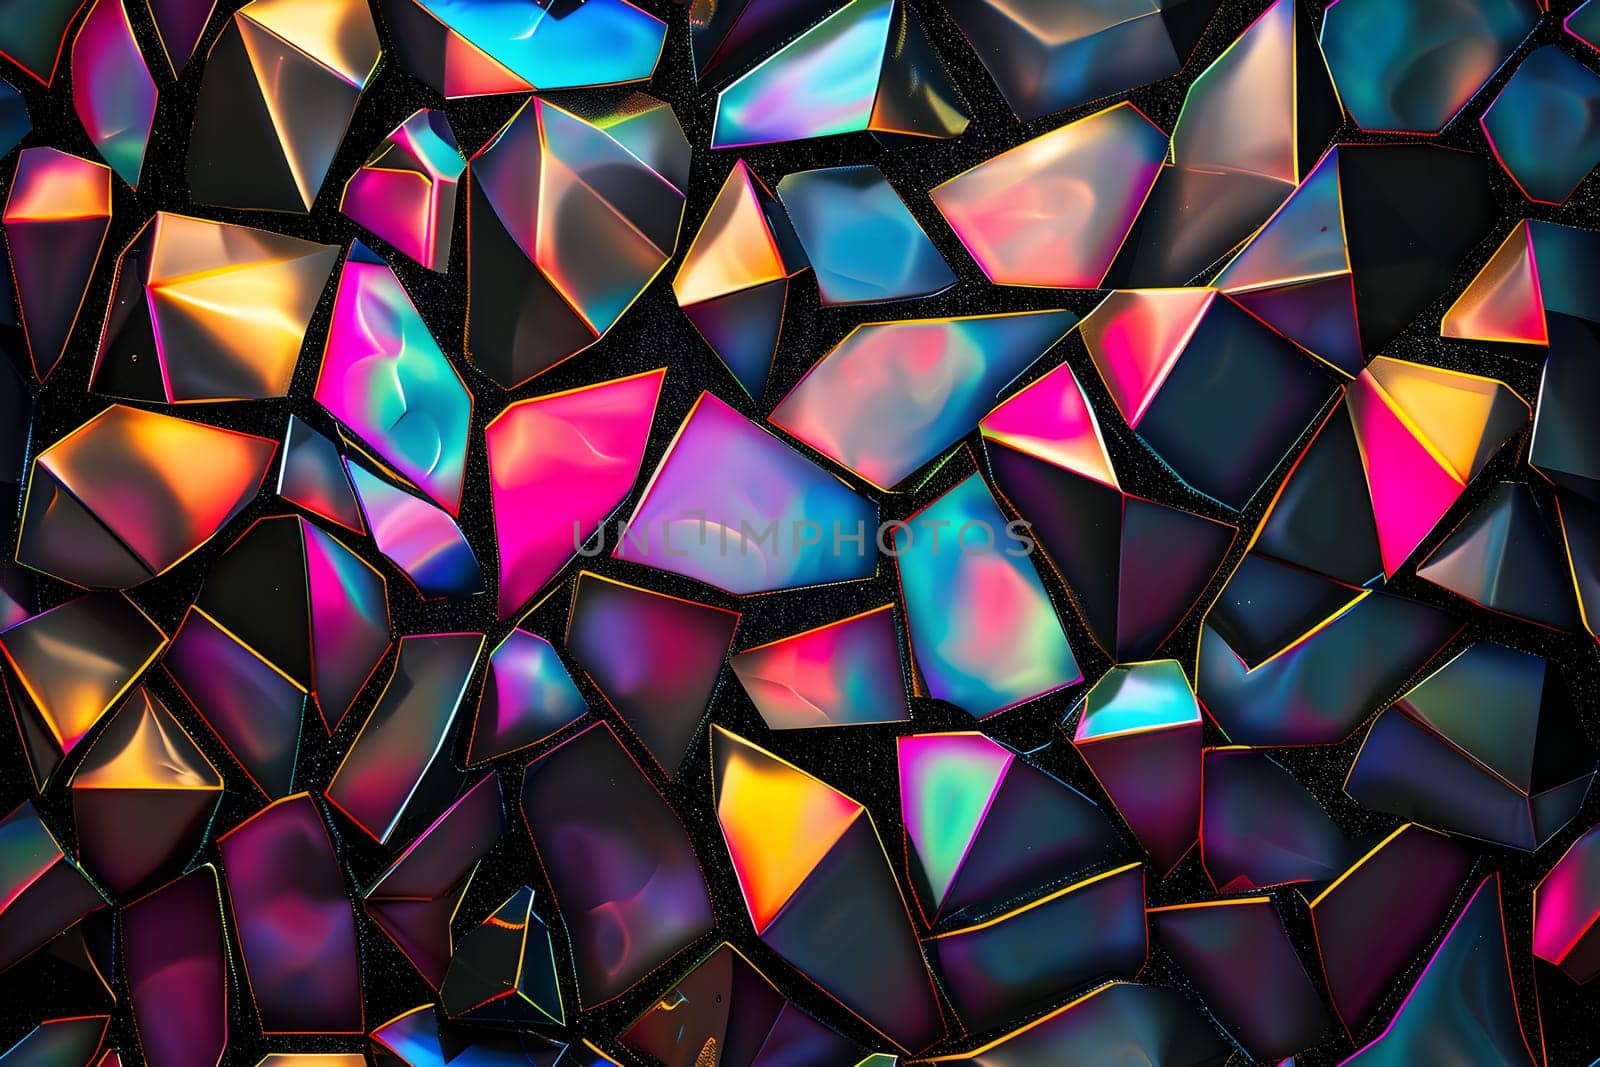 seamless texture and full-frame background of colorful glass mosaic triangular tiles by z1b